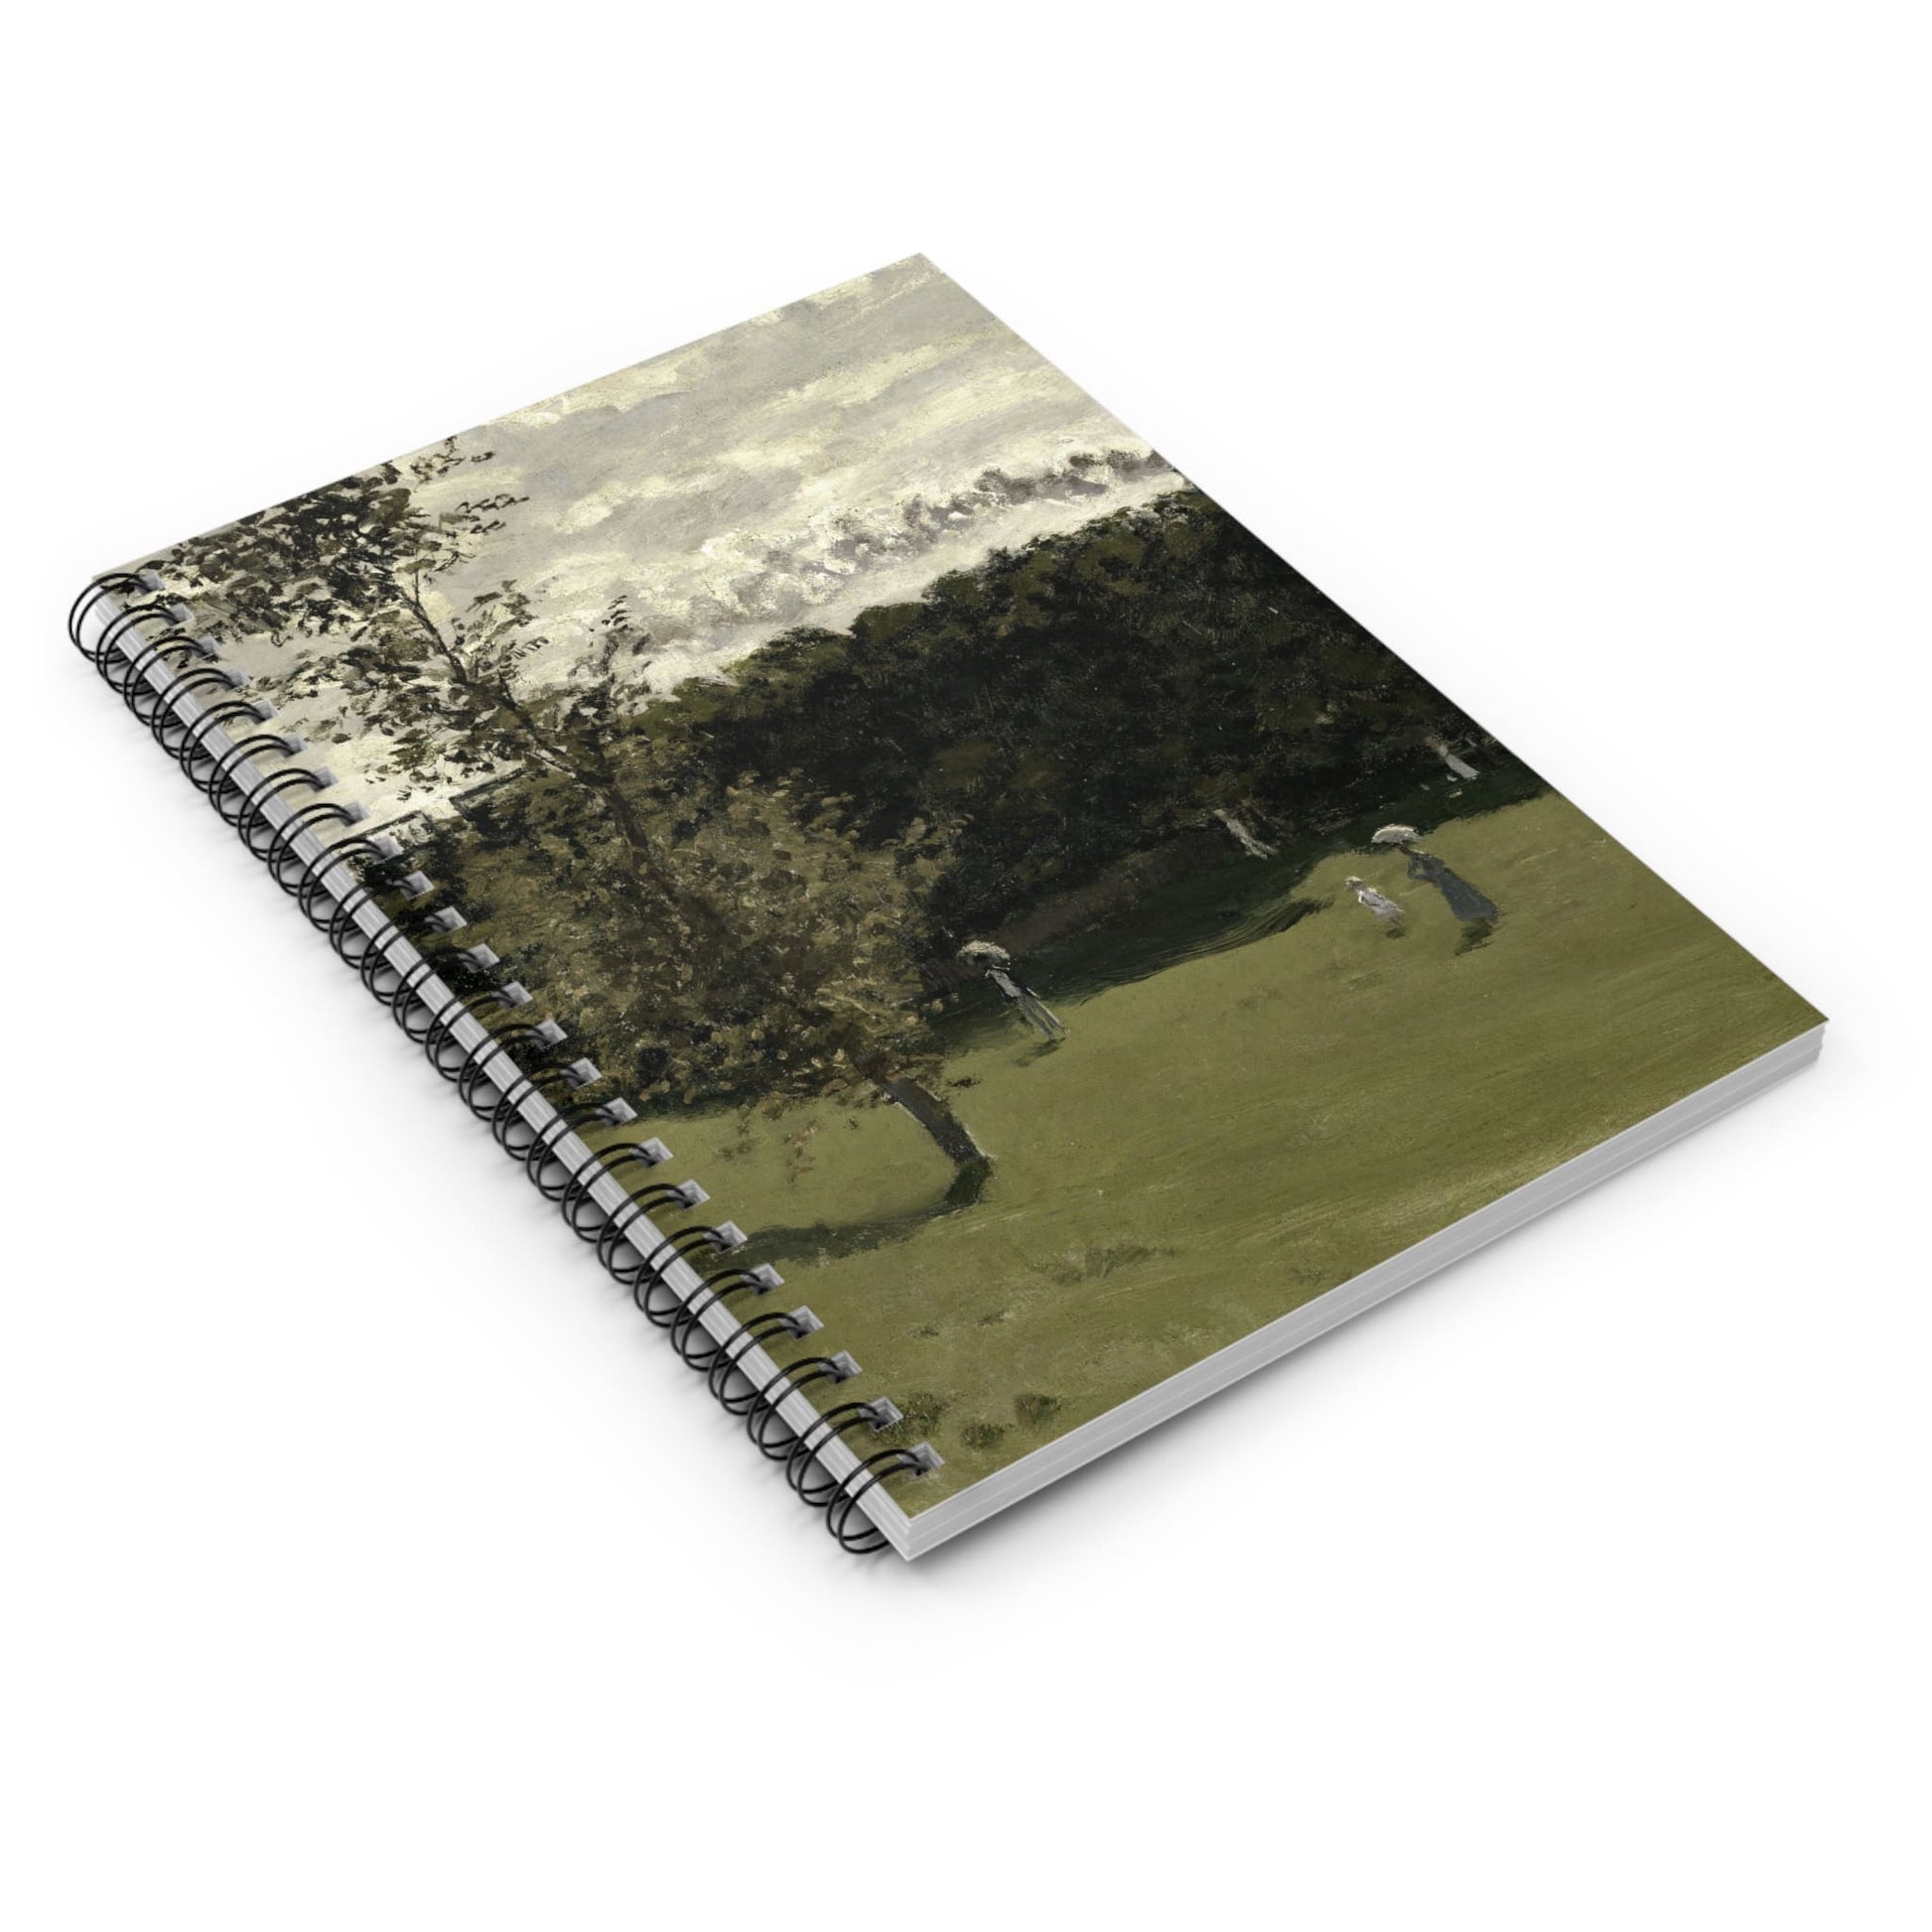 Sage Green Landscape Spiral Notebook Laying Flat on White Surface